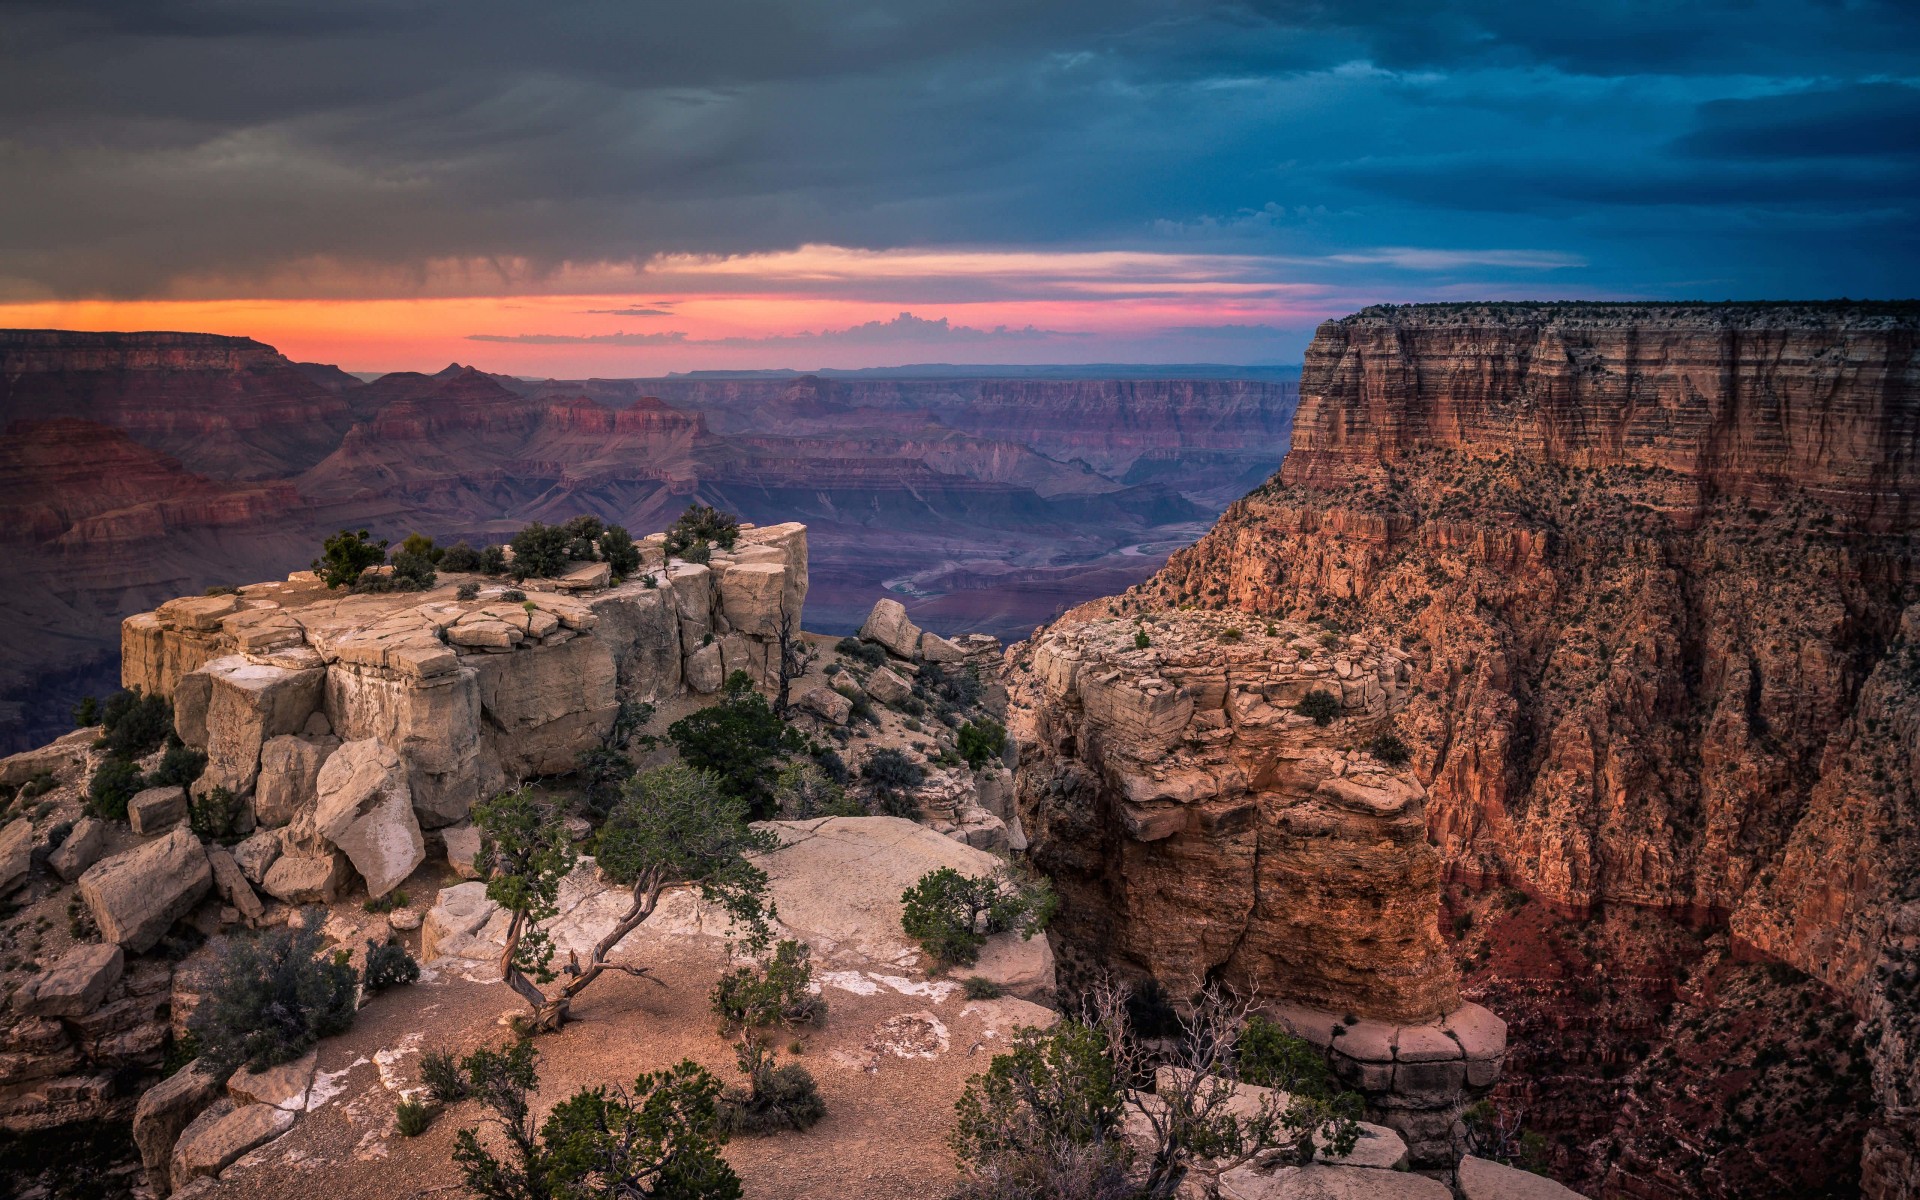 Sunset At The Grand Canyon Wallpaper for Desktop 1920x1200